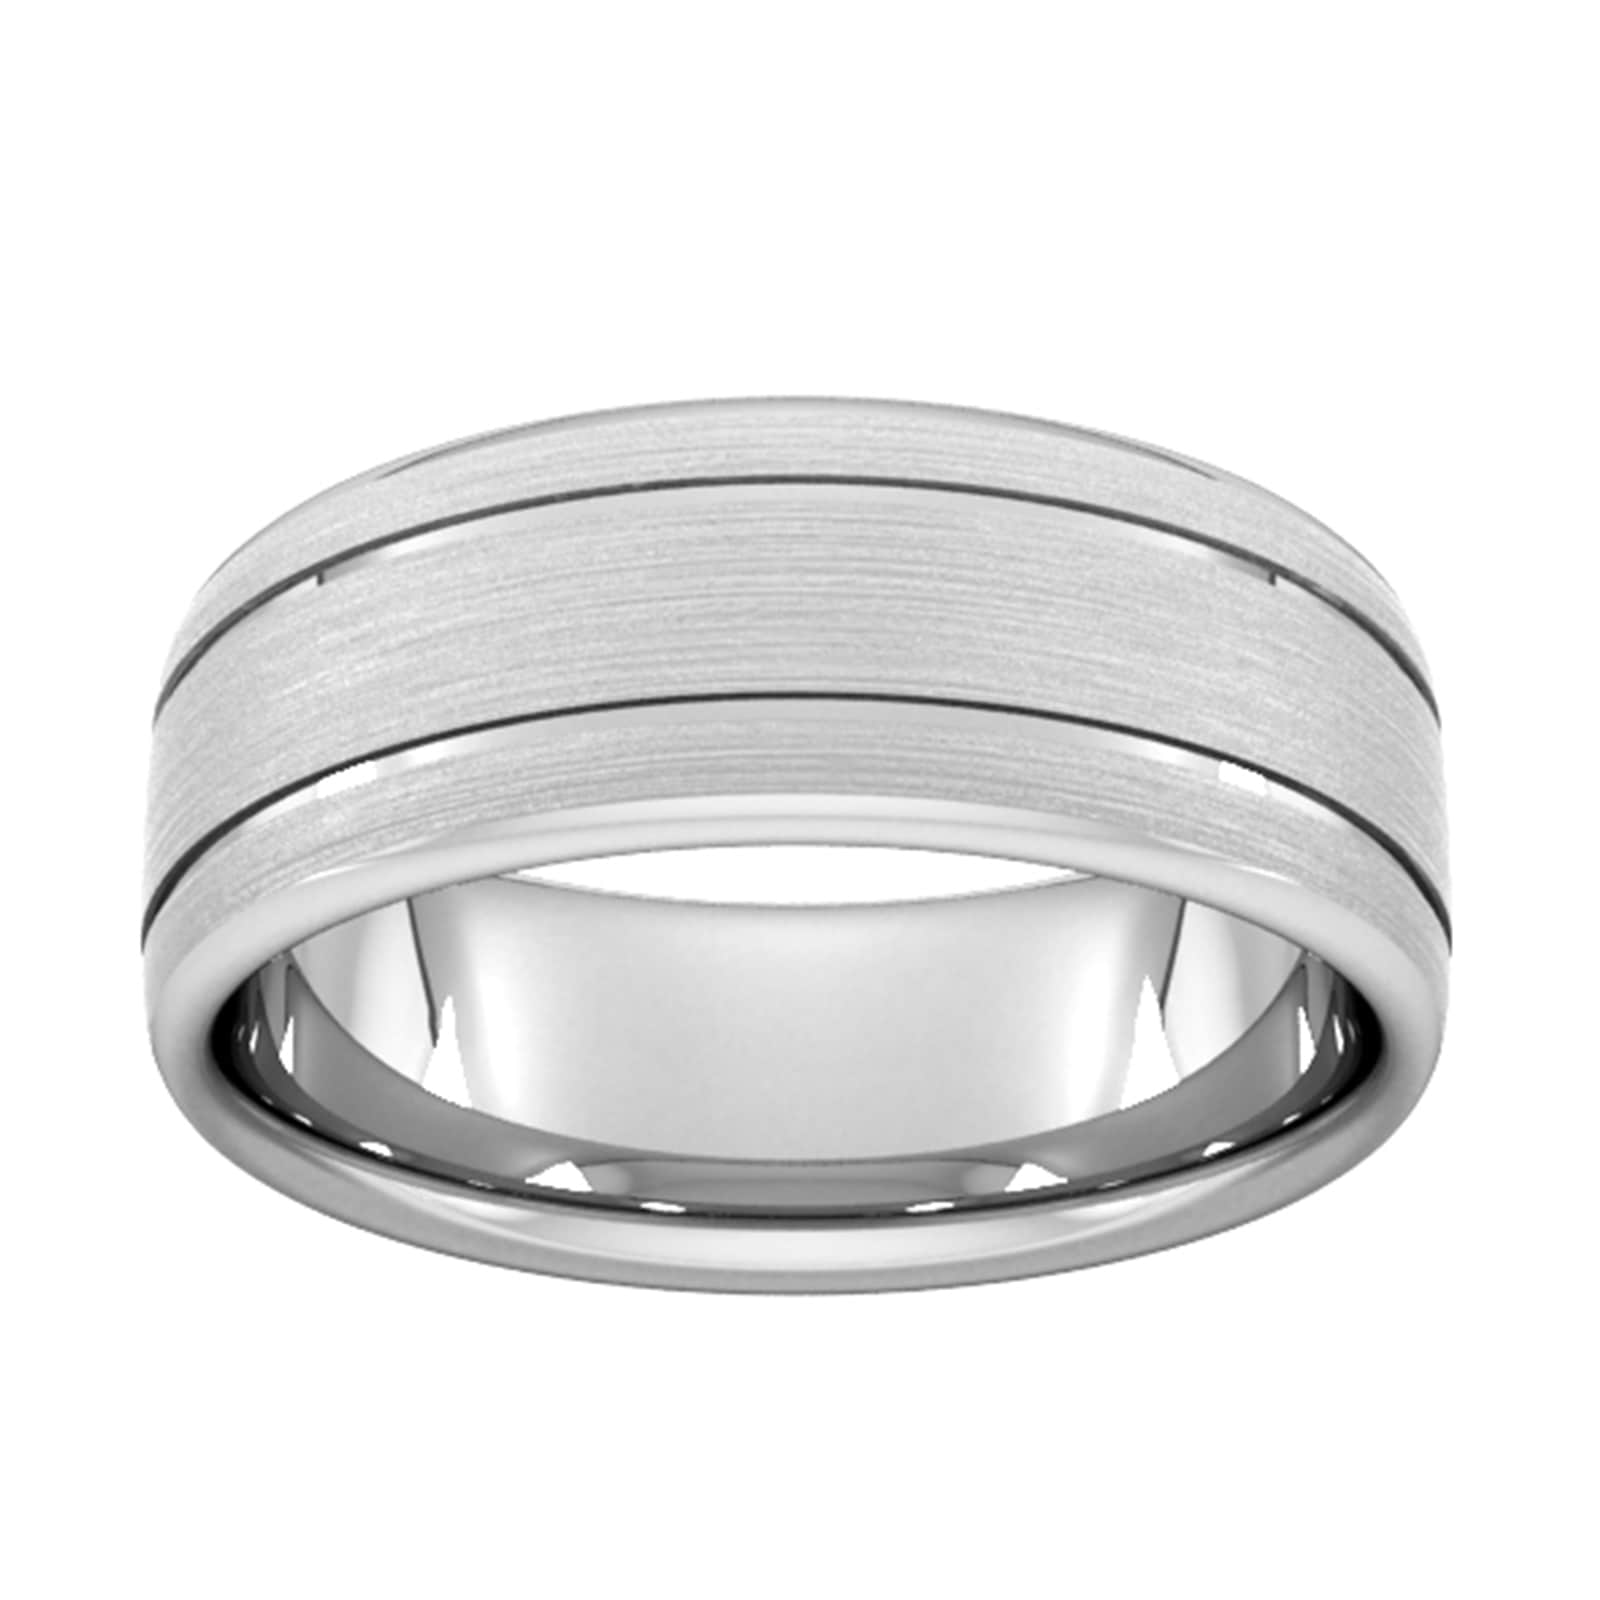 8mm Slight Court Extra Heavy Matt Finish With Double Grooves Wedding Ring In 18 Carat White Gold - Ring Size O